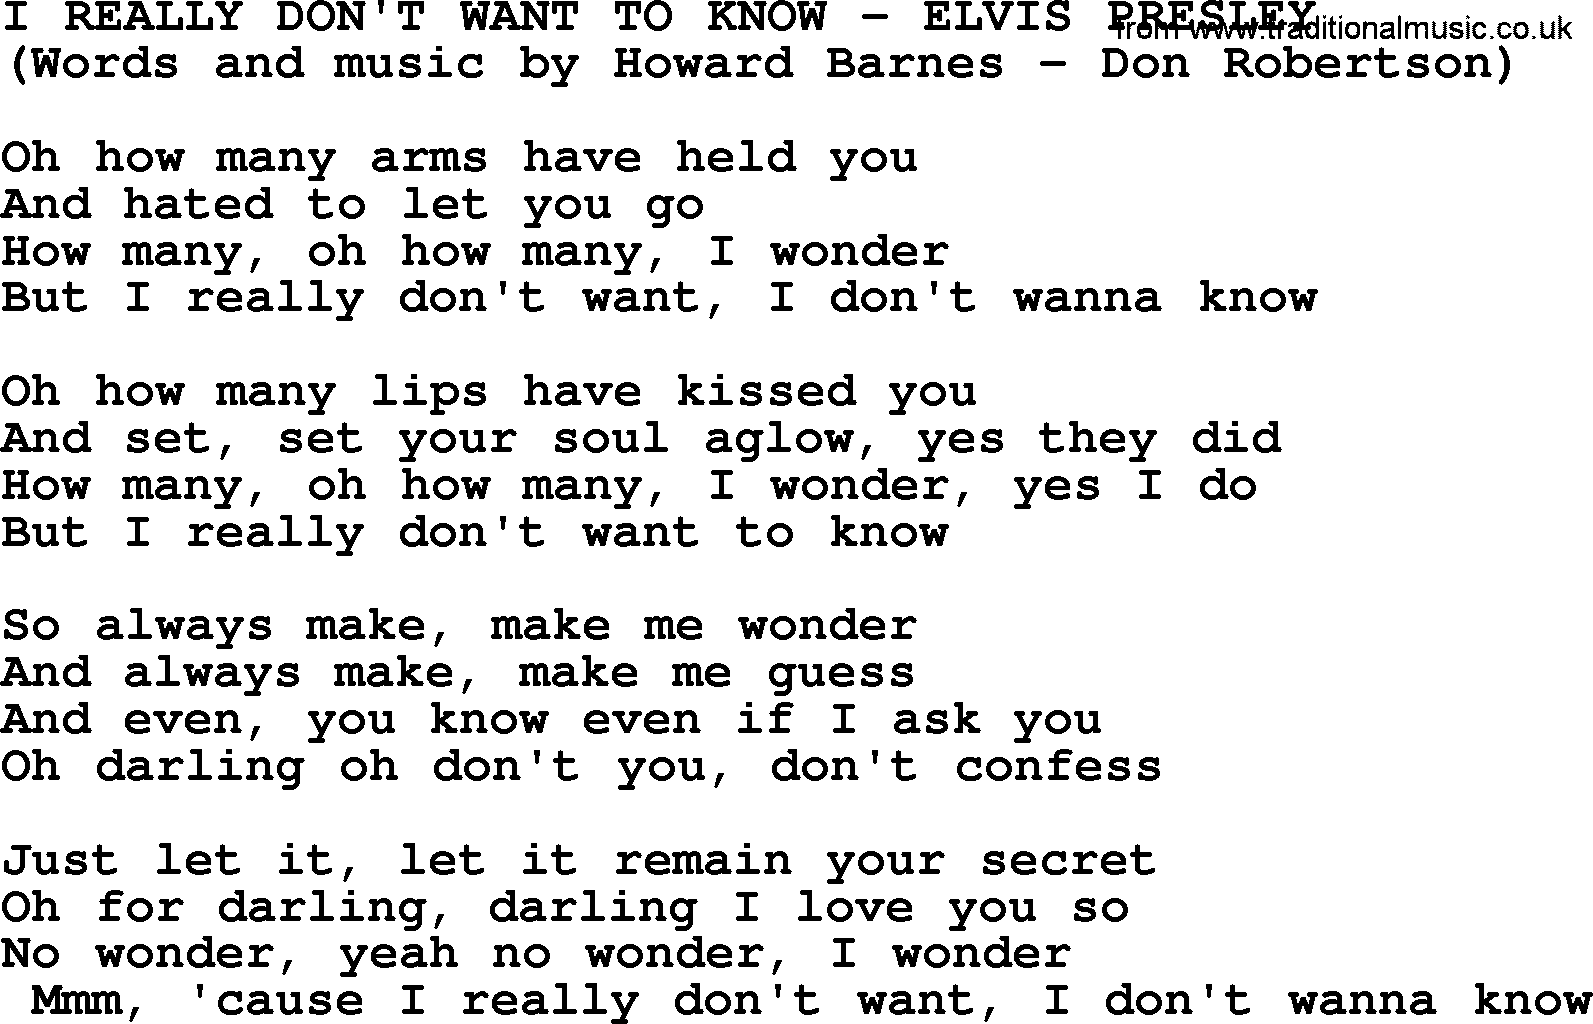 Elvis Presley song: I Really Don't Want To Know lyrics